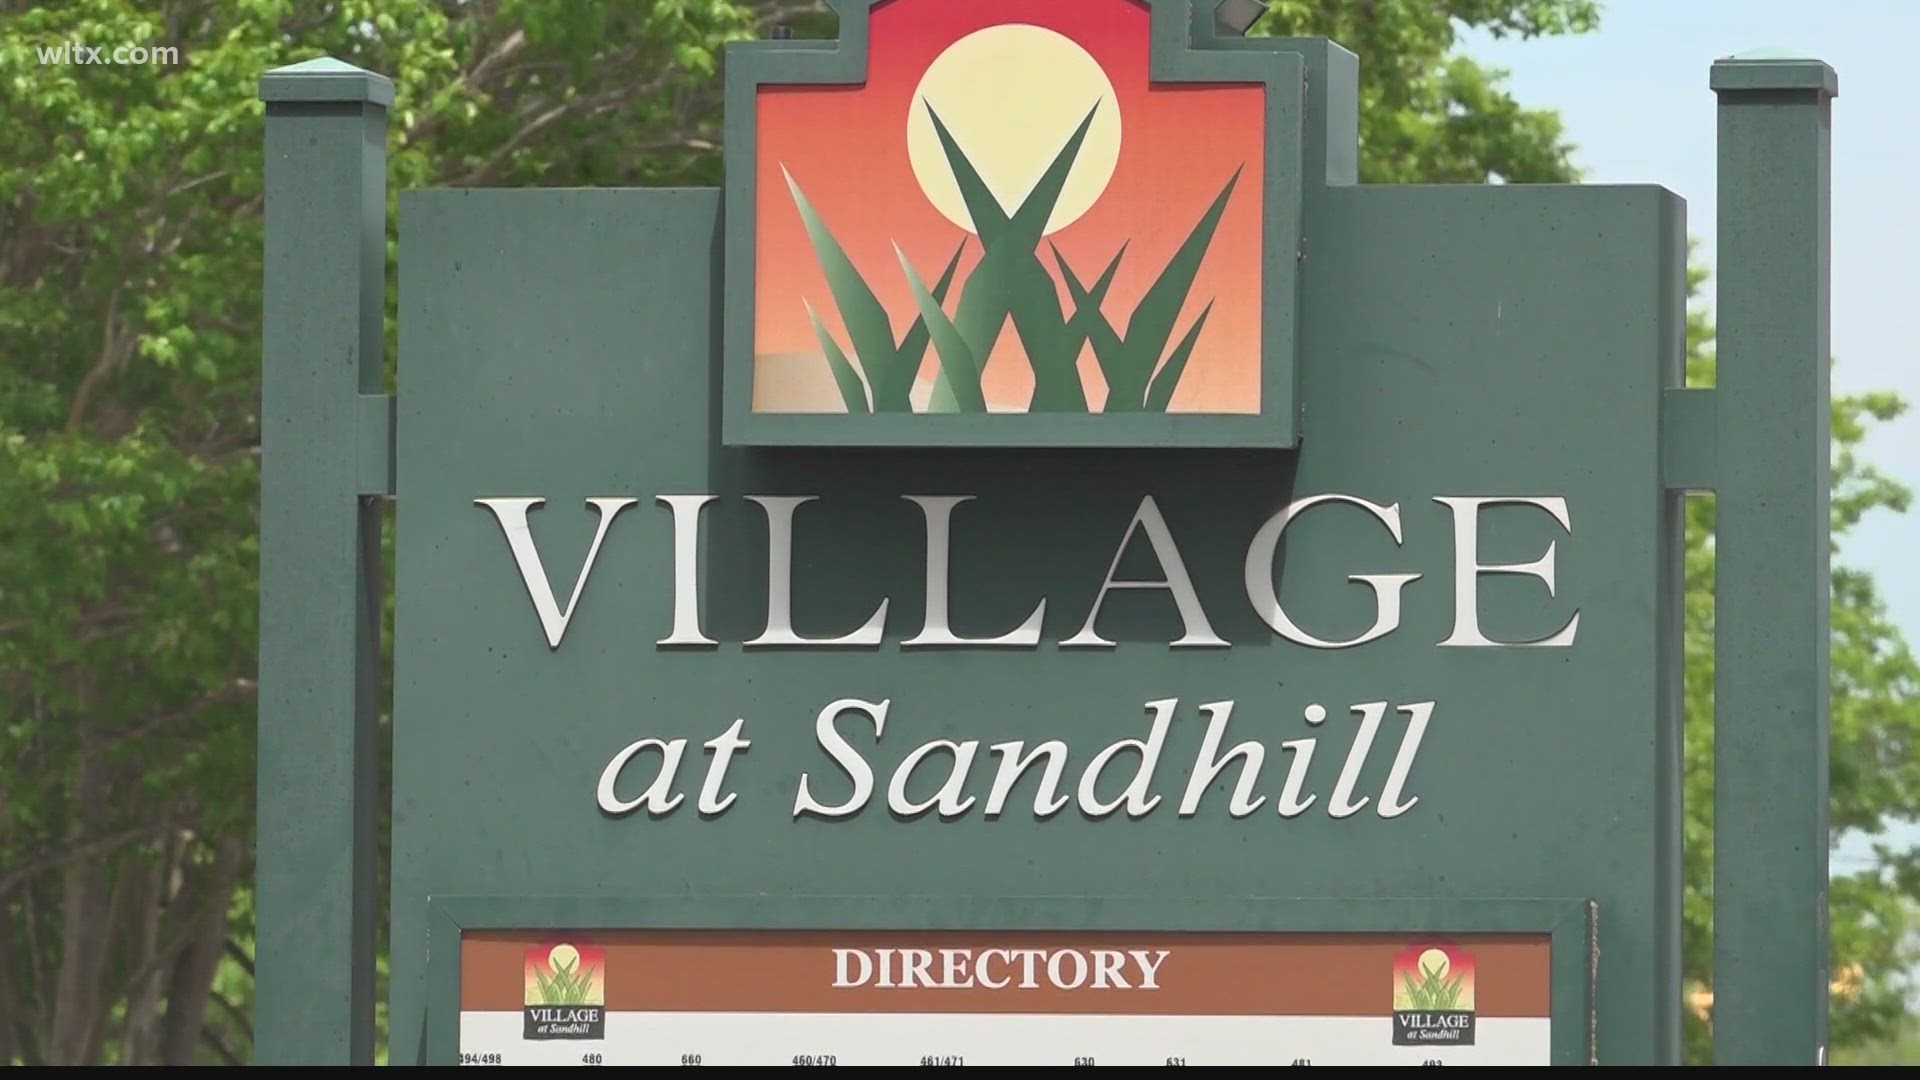 With the recent closing of businesses in the Village at Sandhill area many are wondering about the future of the area.